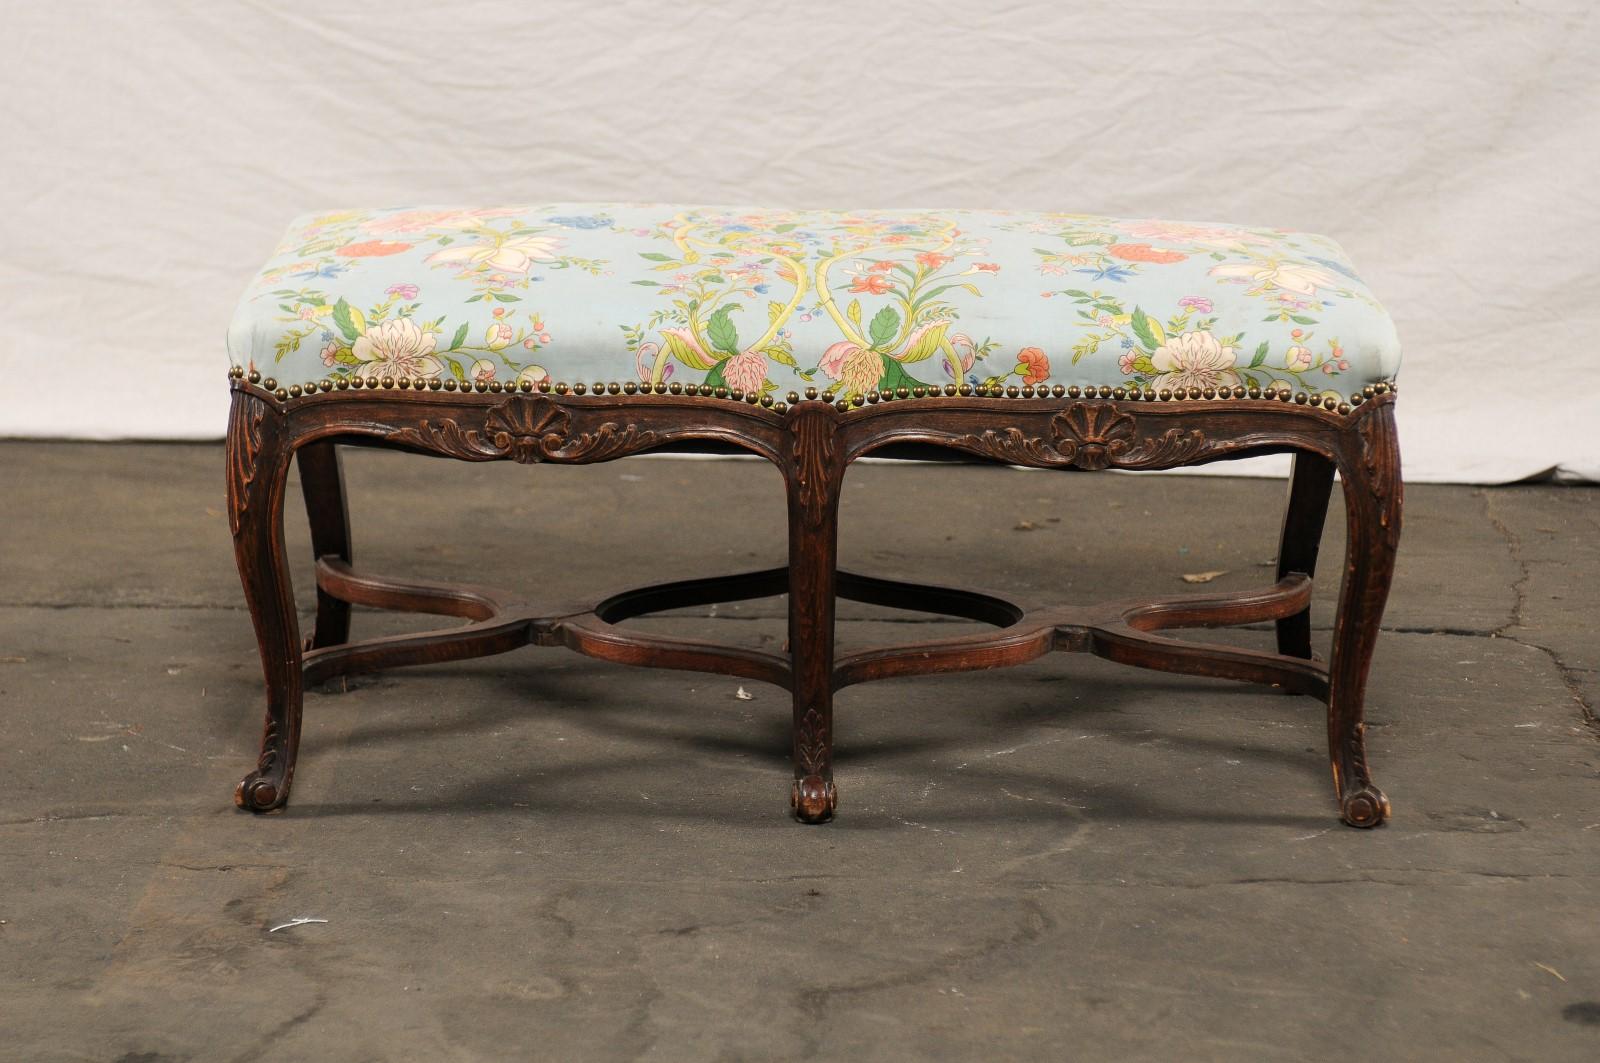 19th century Regence style hand carved French bench
beautiful carving.